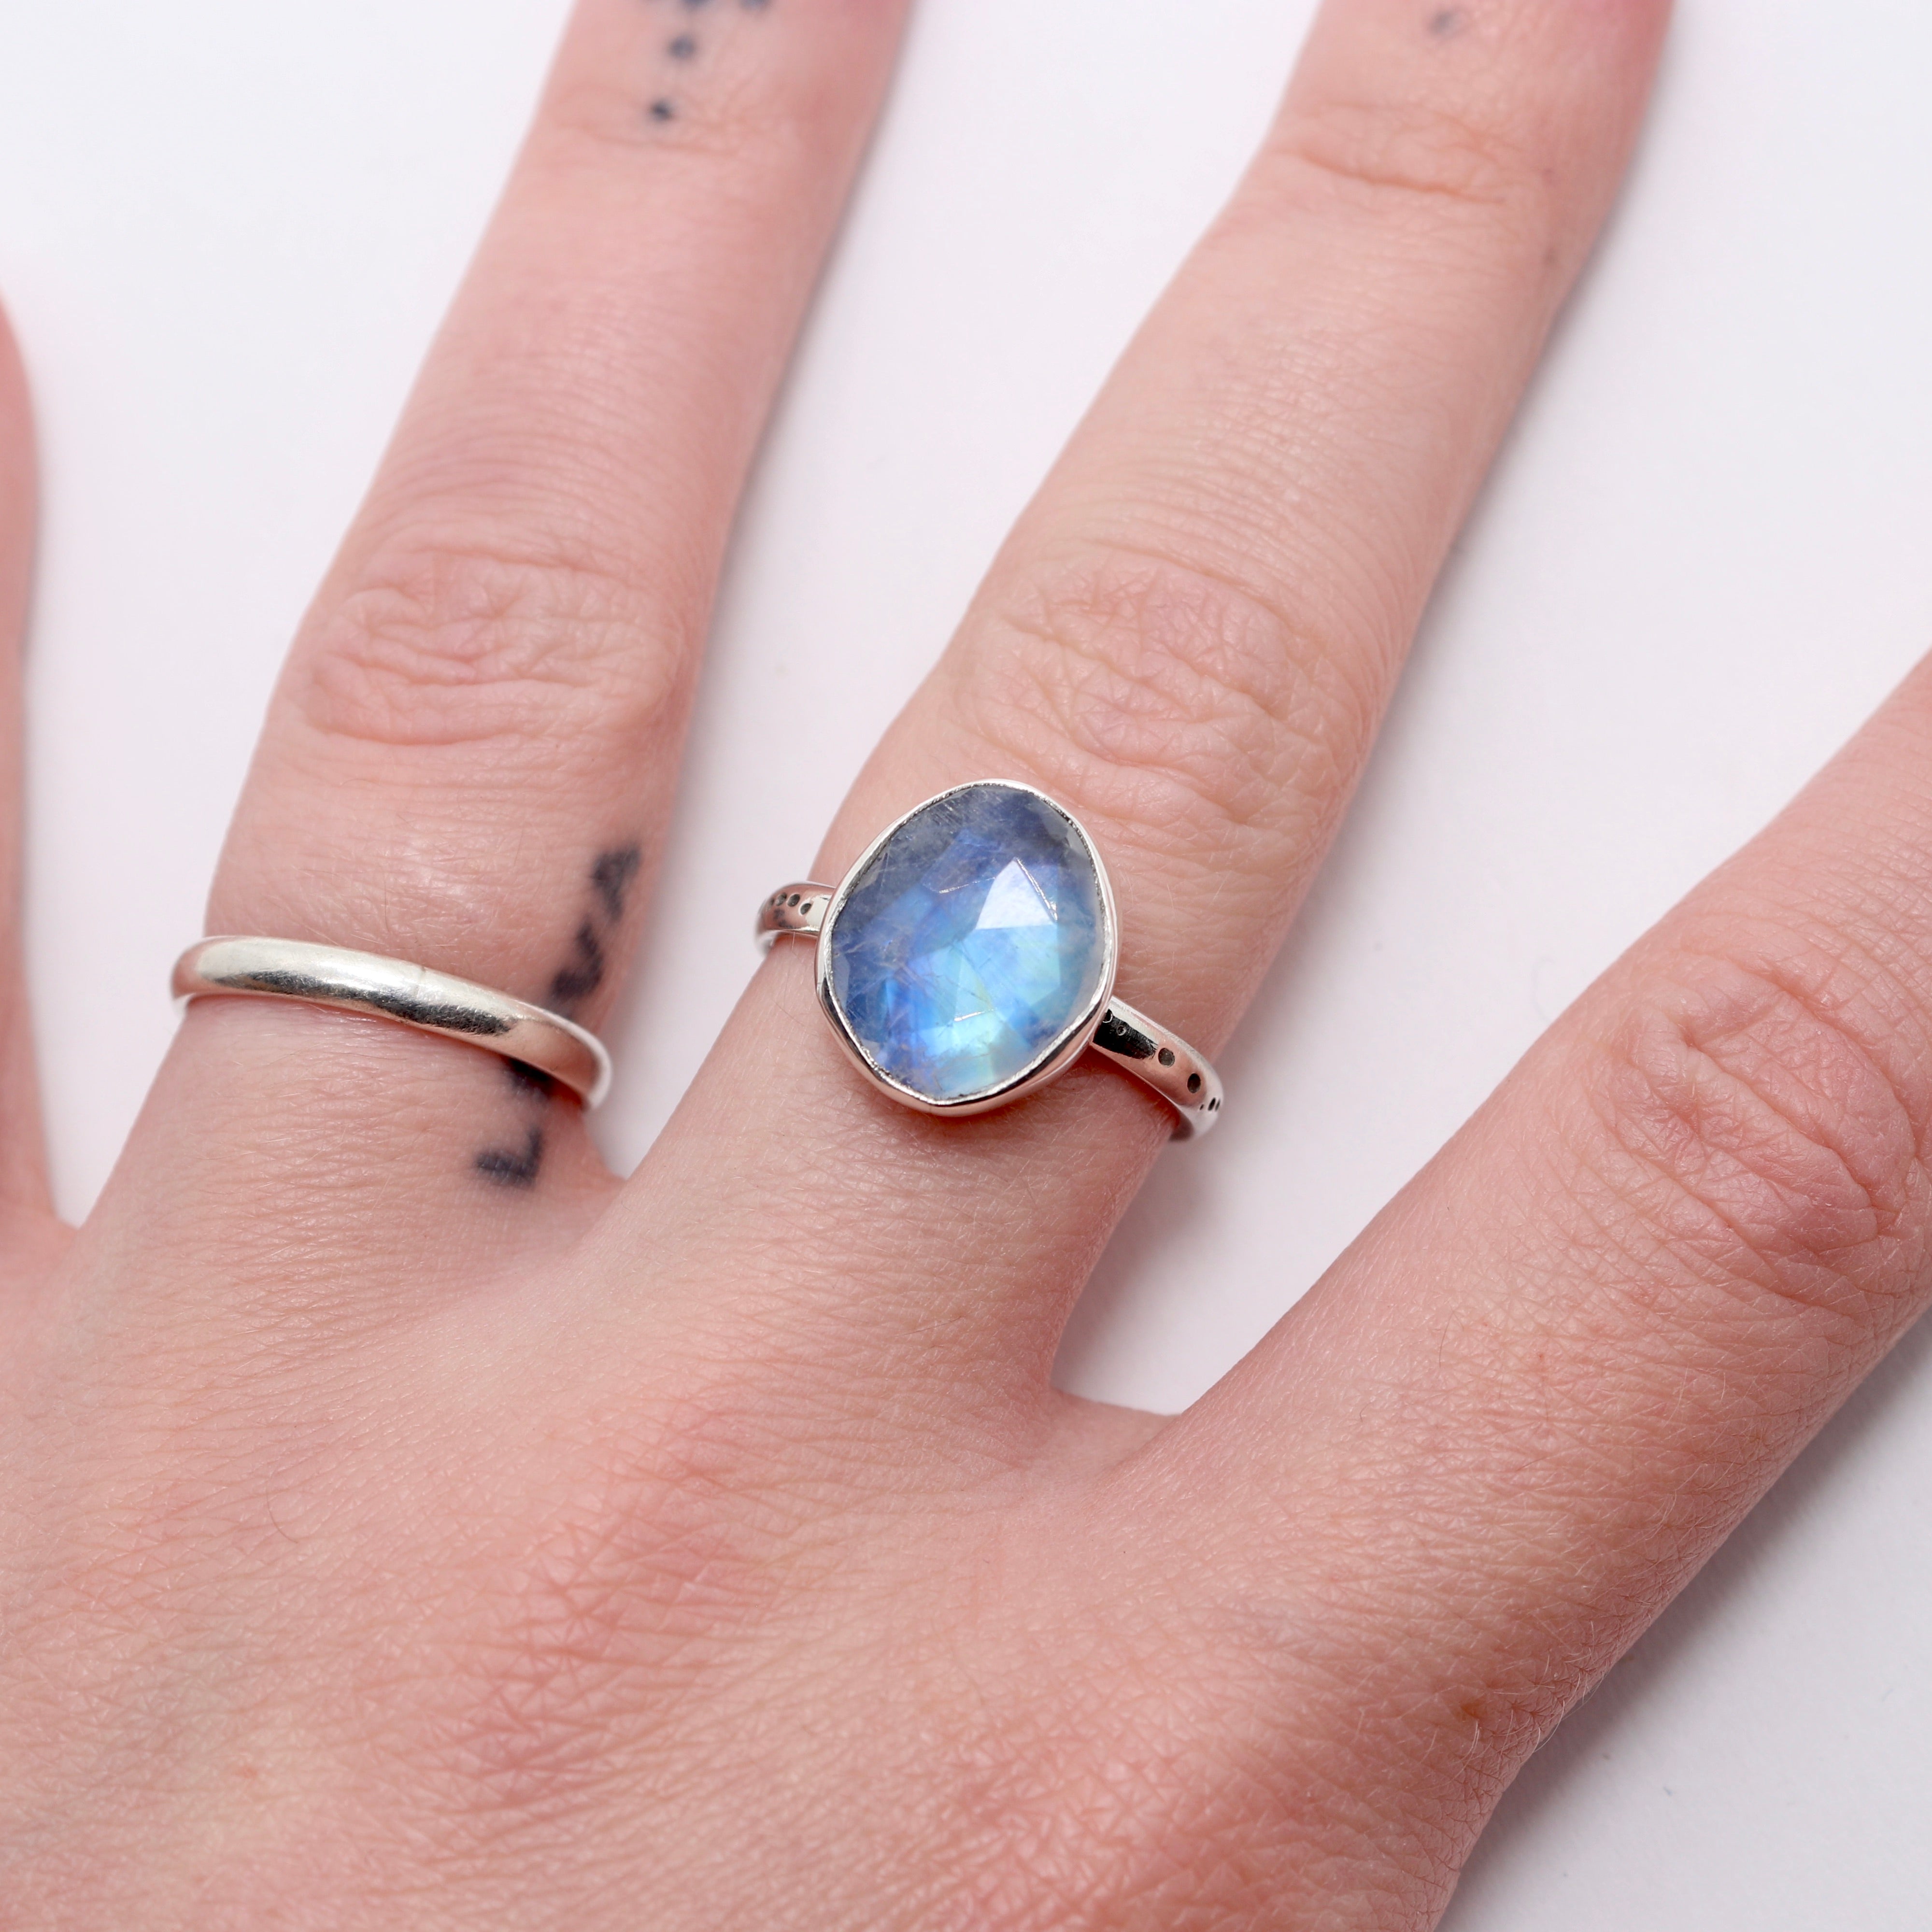 Bohemian moonstone ring set in sterling silver